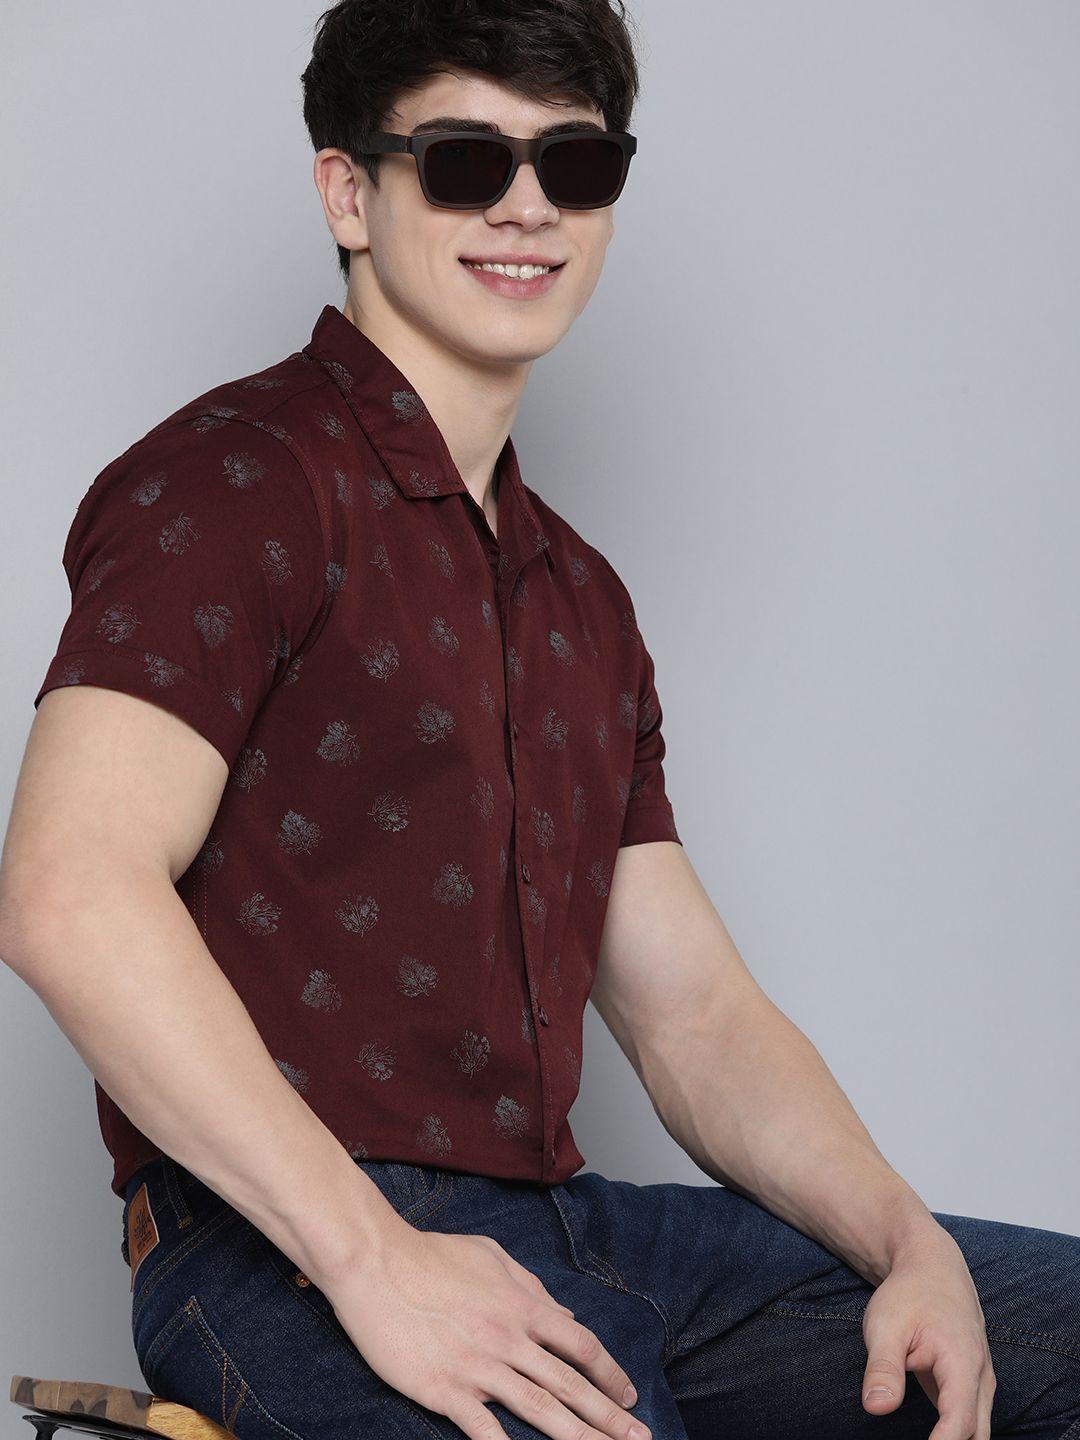 here&now cuban collar slim fit floral printed pure cotton casual shirt